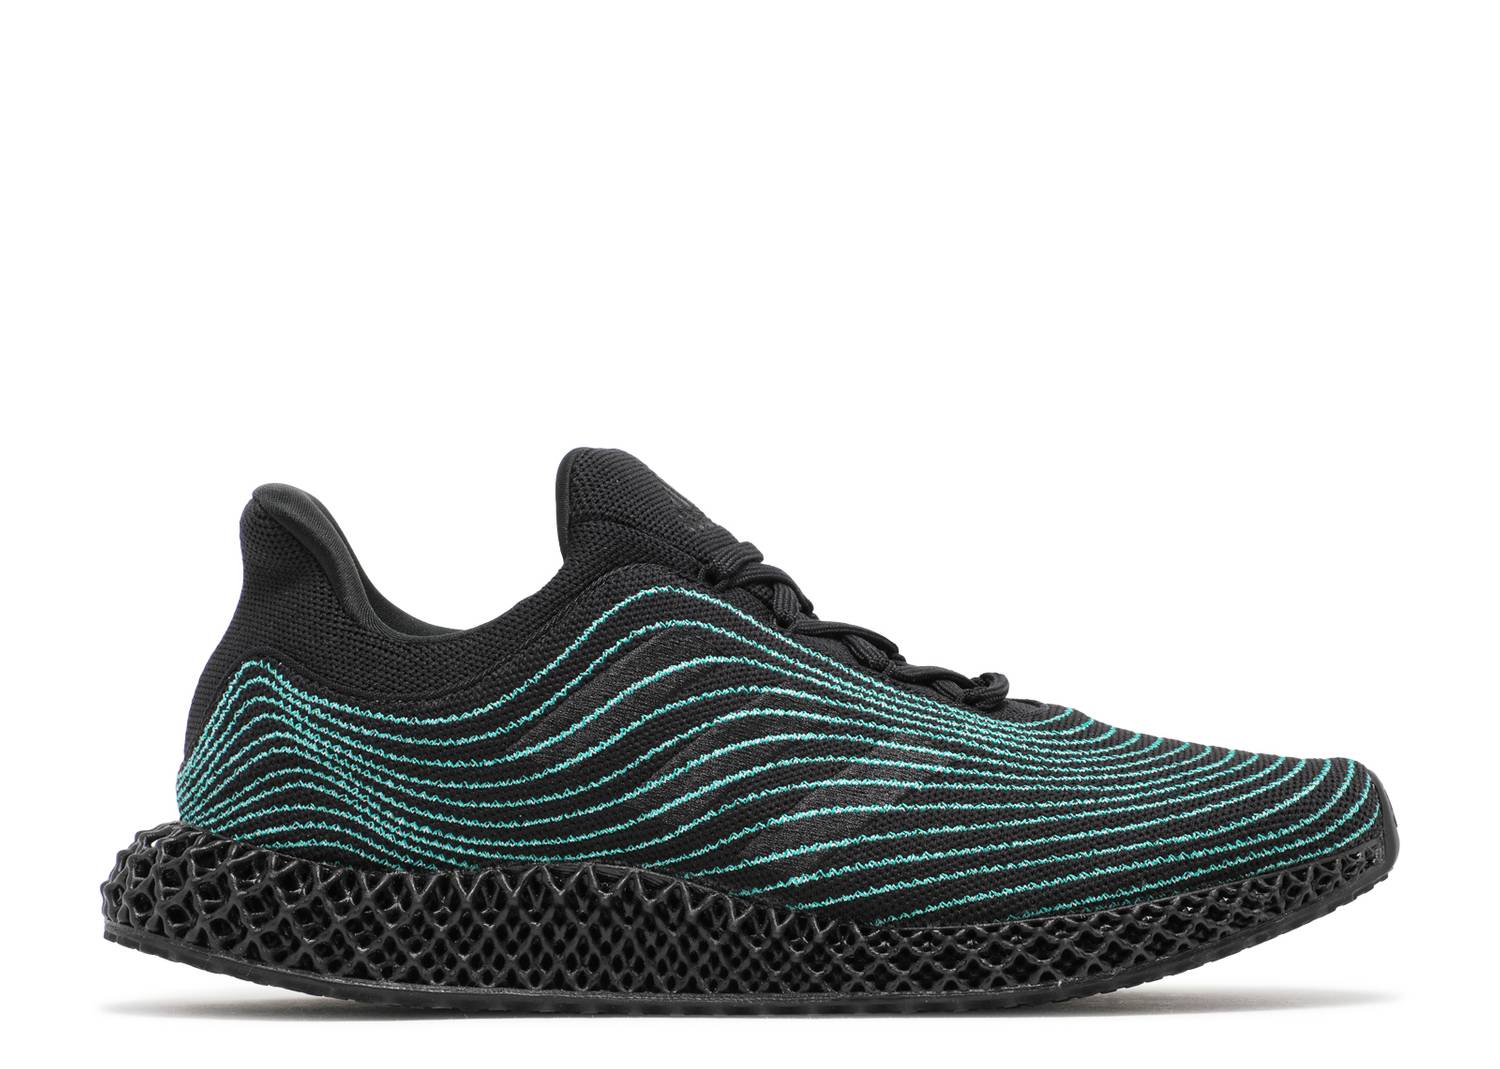 ADIDAS ULTRA BOOST 4D UNCAGED X PARLEY “BLACK”